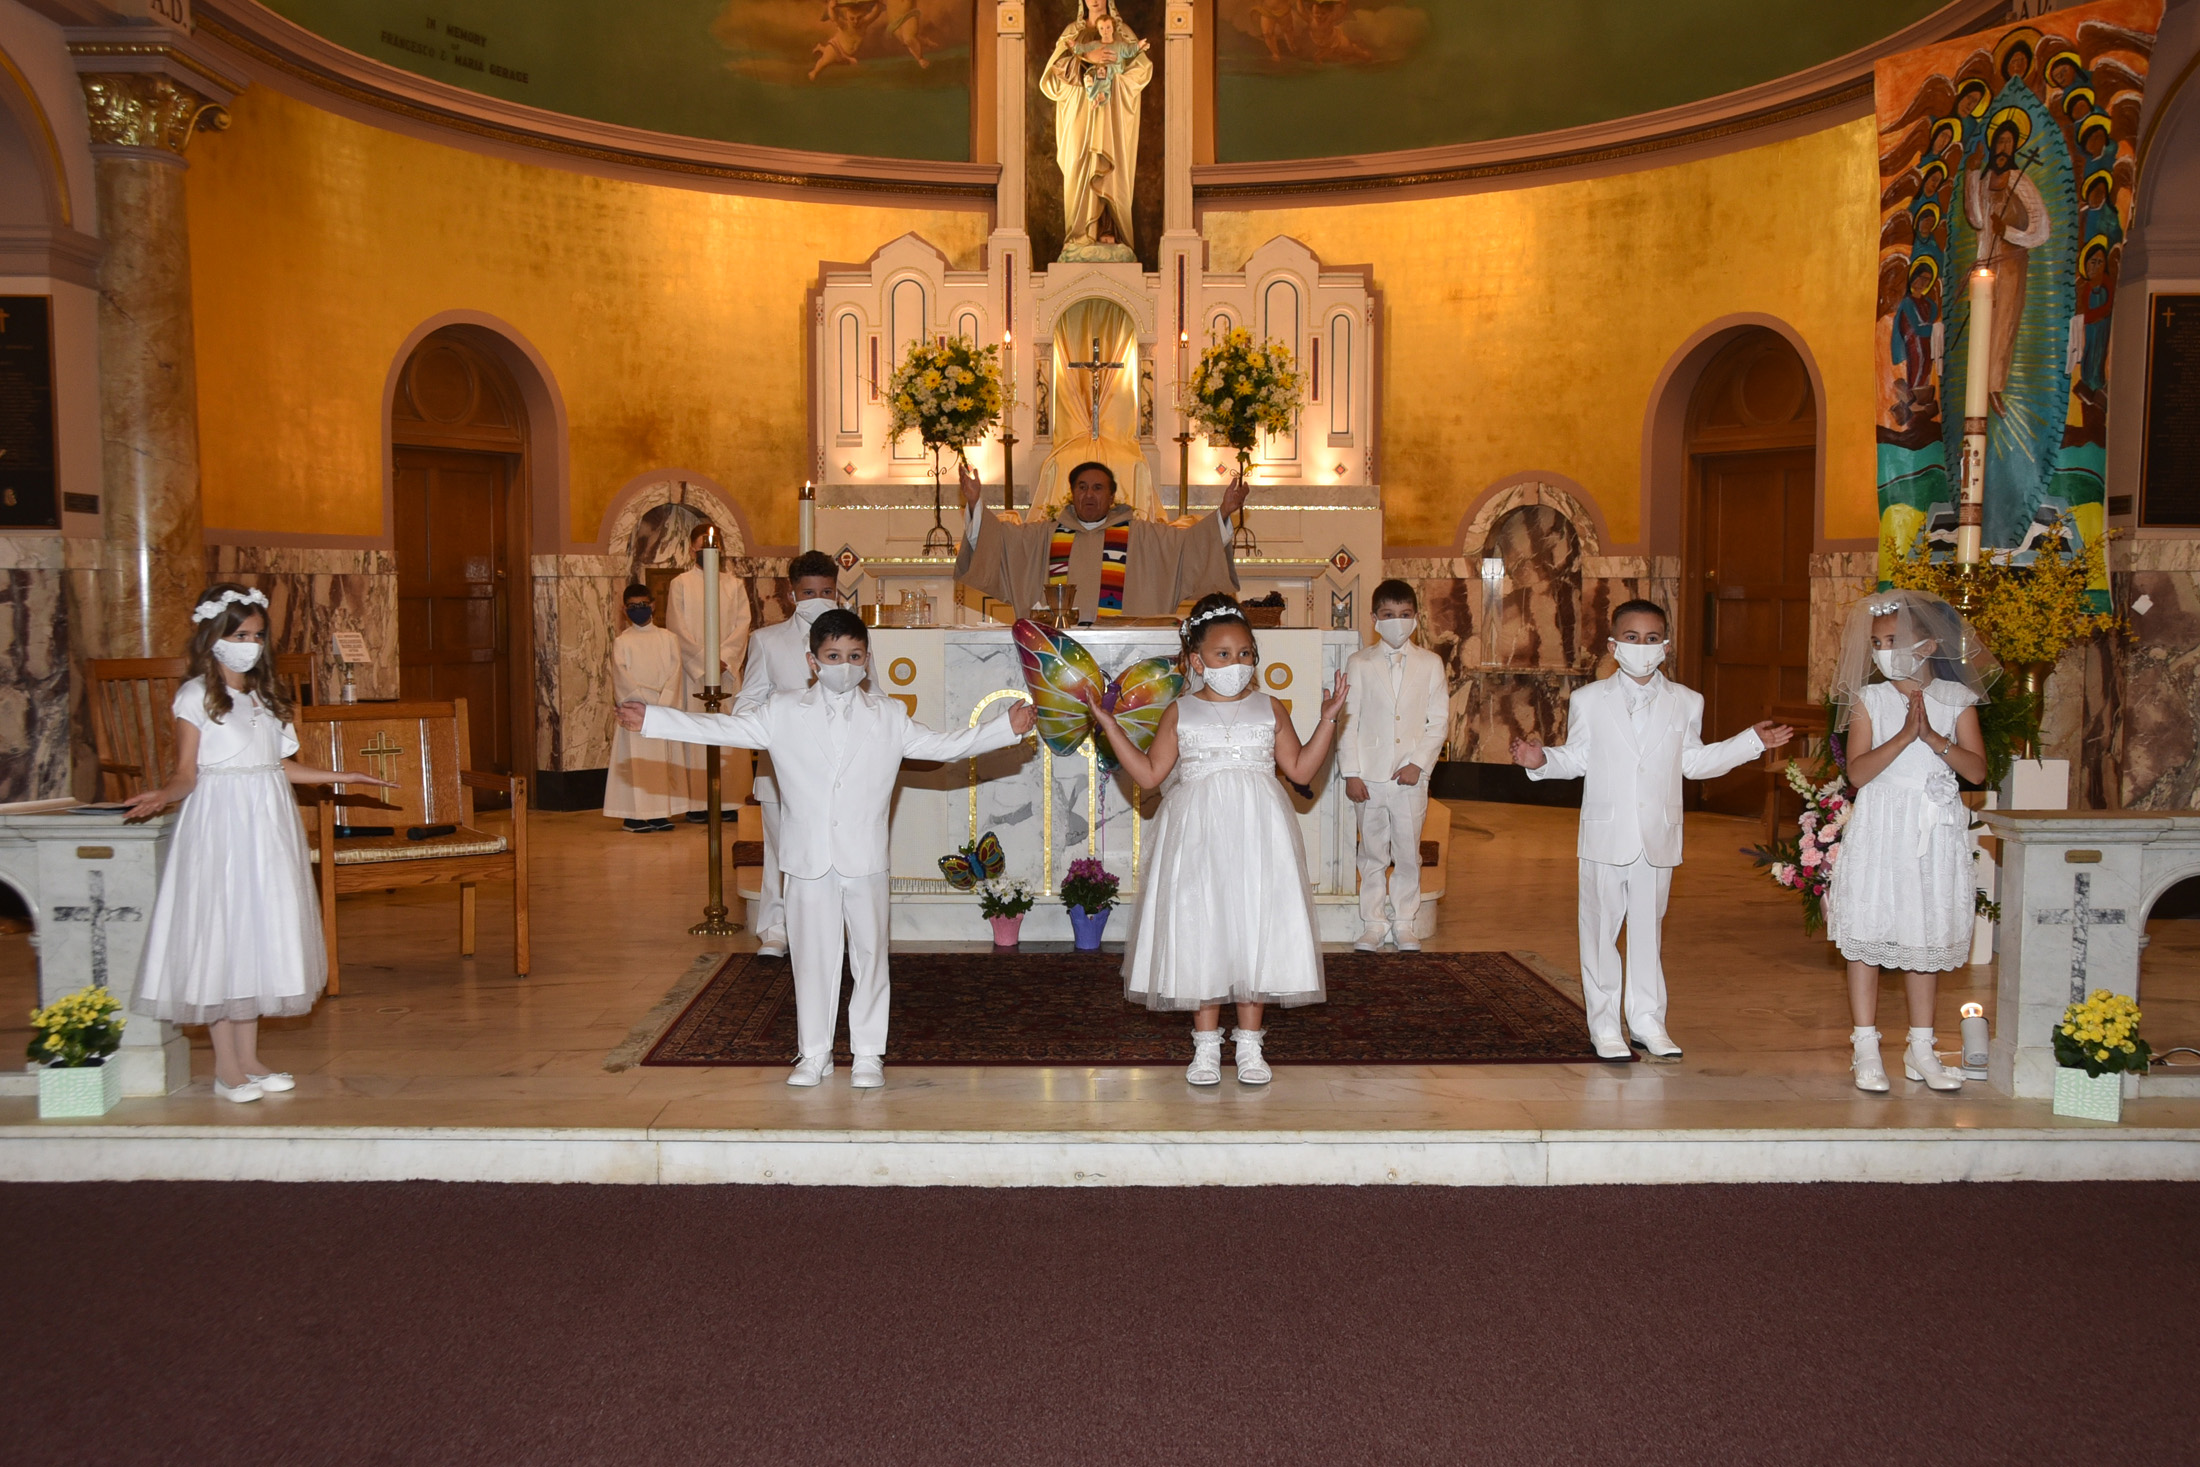 FIRST-COMMUNION-MAY-15-2021-10011098